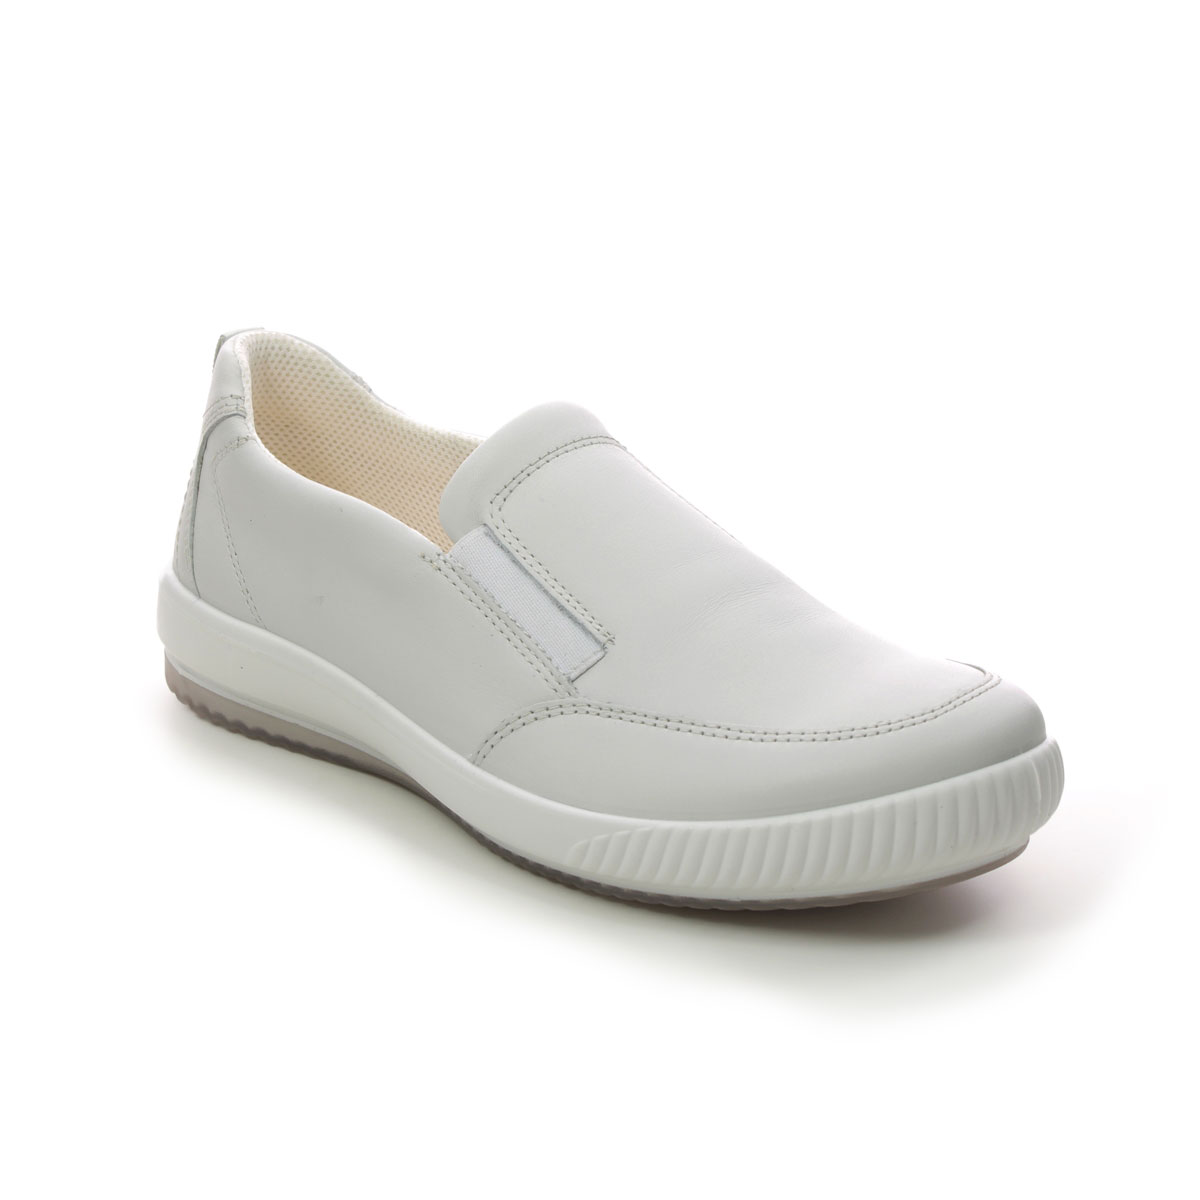 Legero Tanaro 5 Slip WHITE LEATHER Womens Comfort Slip On Shoes 2000215-1000 in a Plain Leather in Size 7